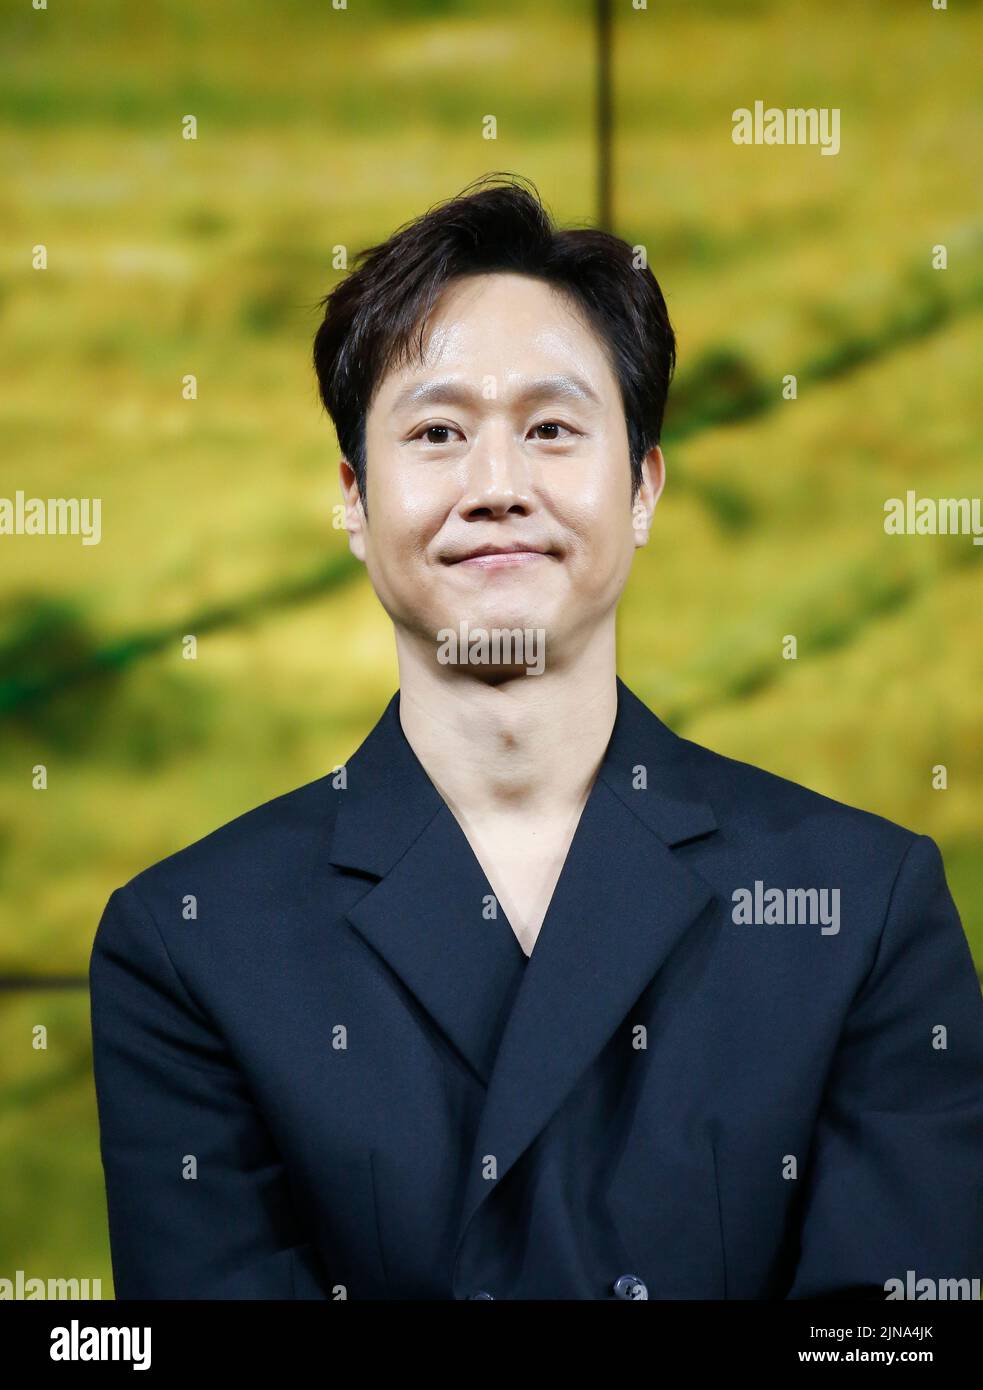 Jung Woo, August 9, 2022 : South Korean actor Jung Woo attends a production press conference for upcoming Netflix original series 'A Model Family' in Seoul, South Korea. Credit: Lee Jae-Won/AFLO/Alamy Live News Stock Photo